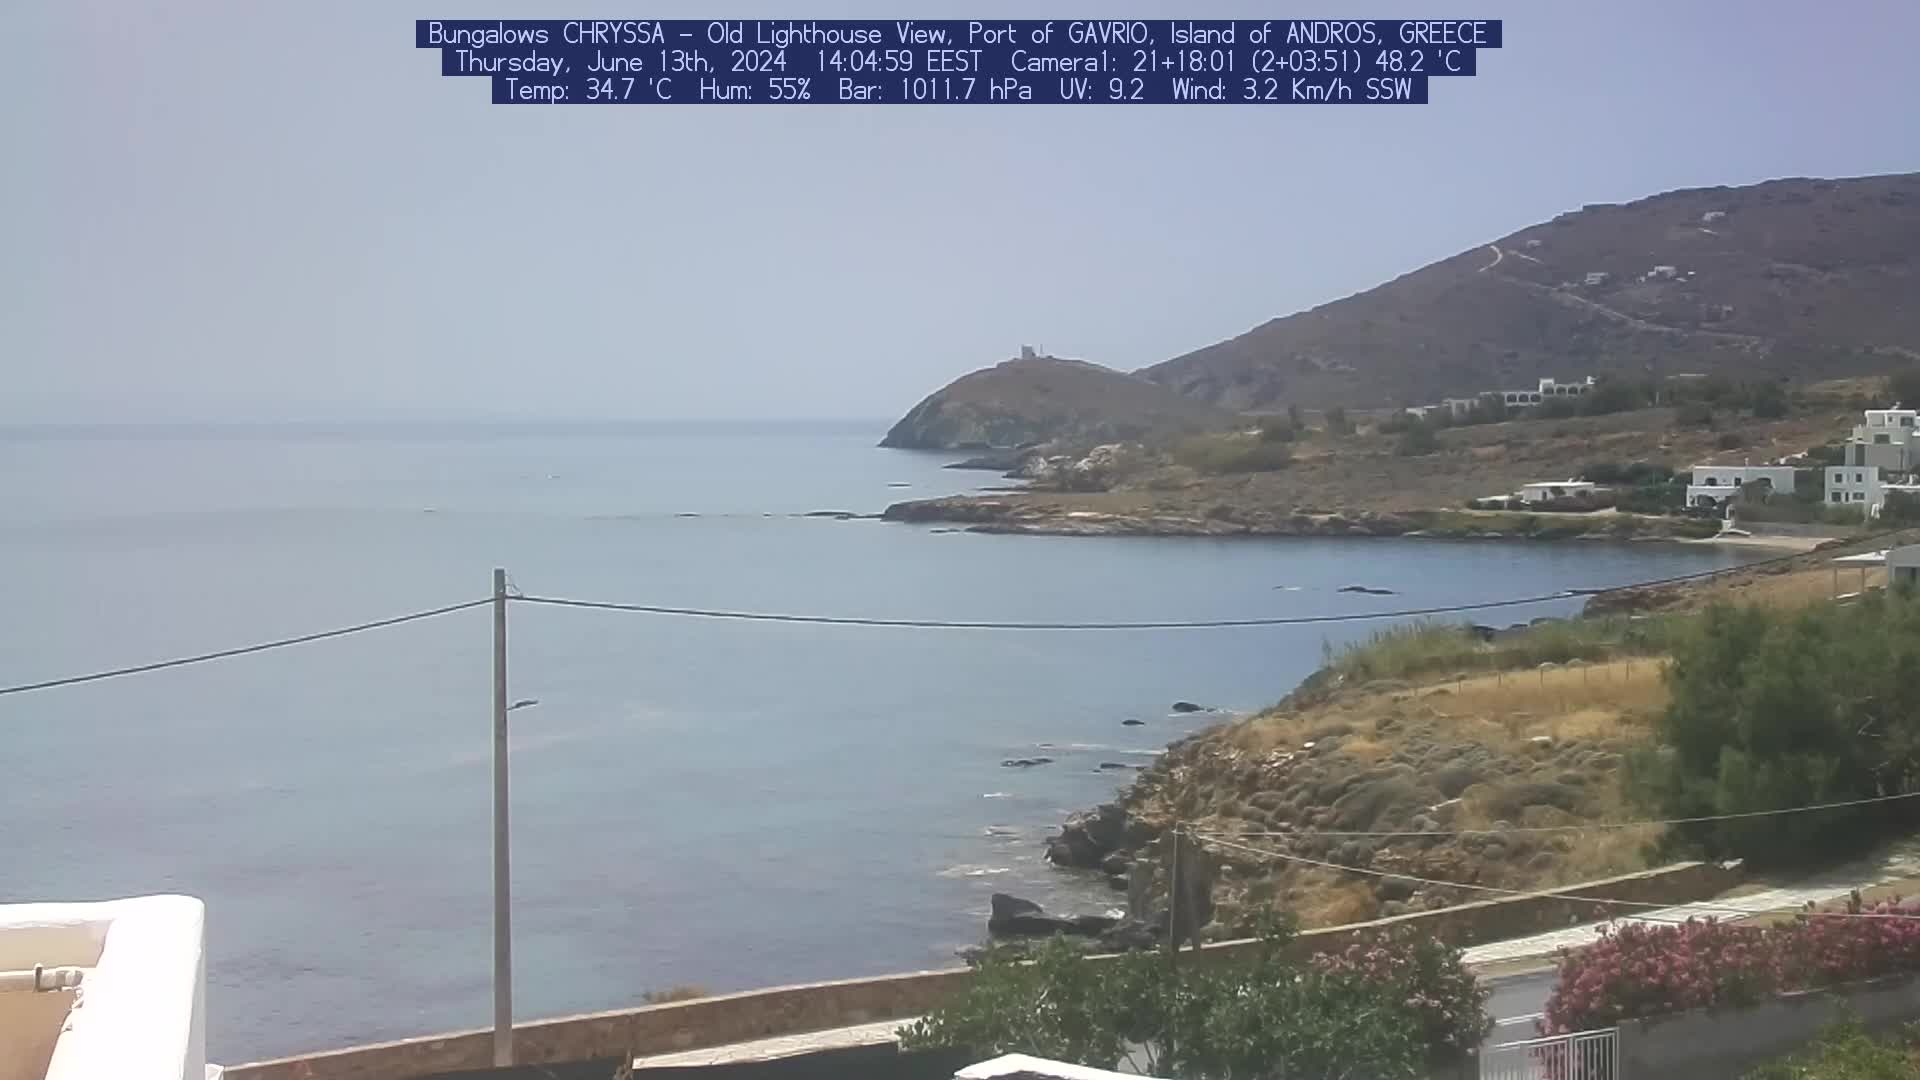 Andros - Gavrion Mar. 14:05